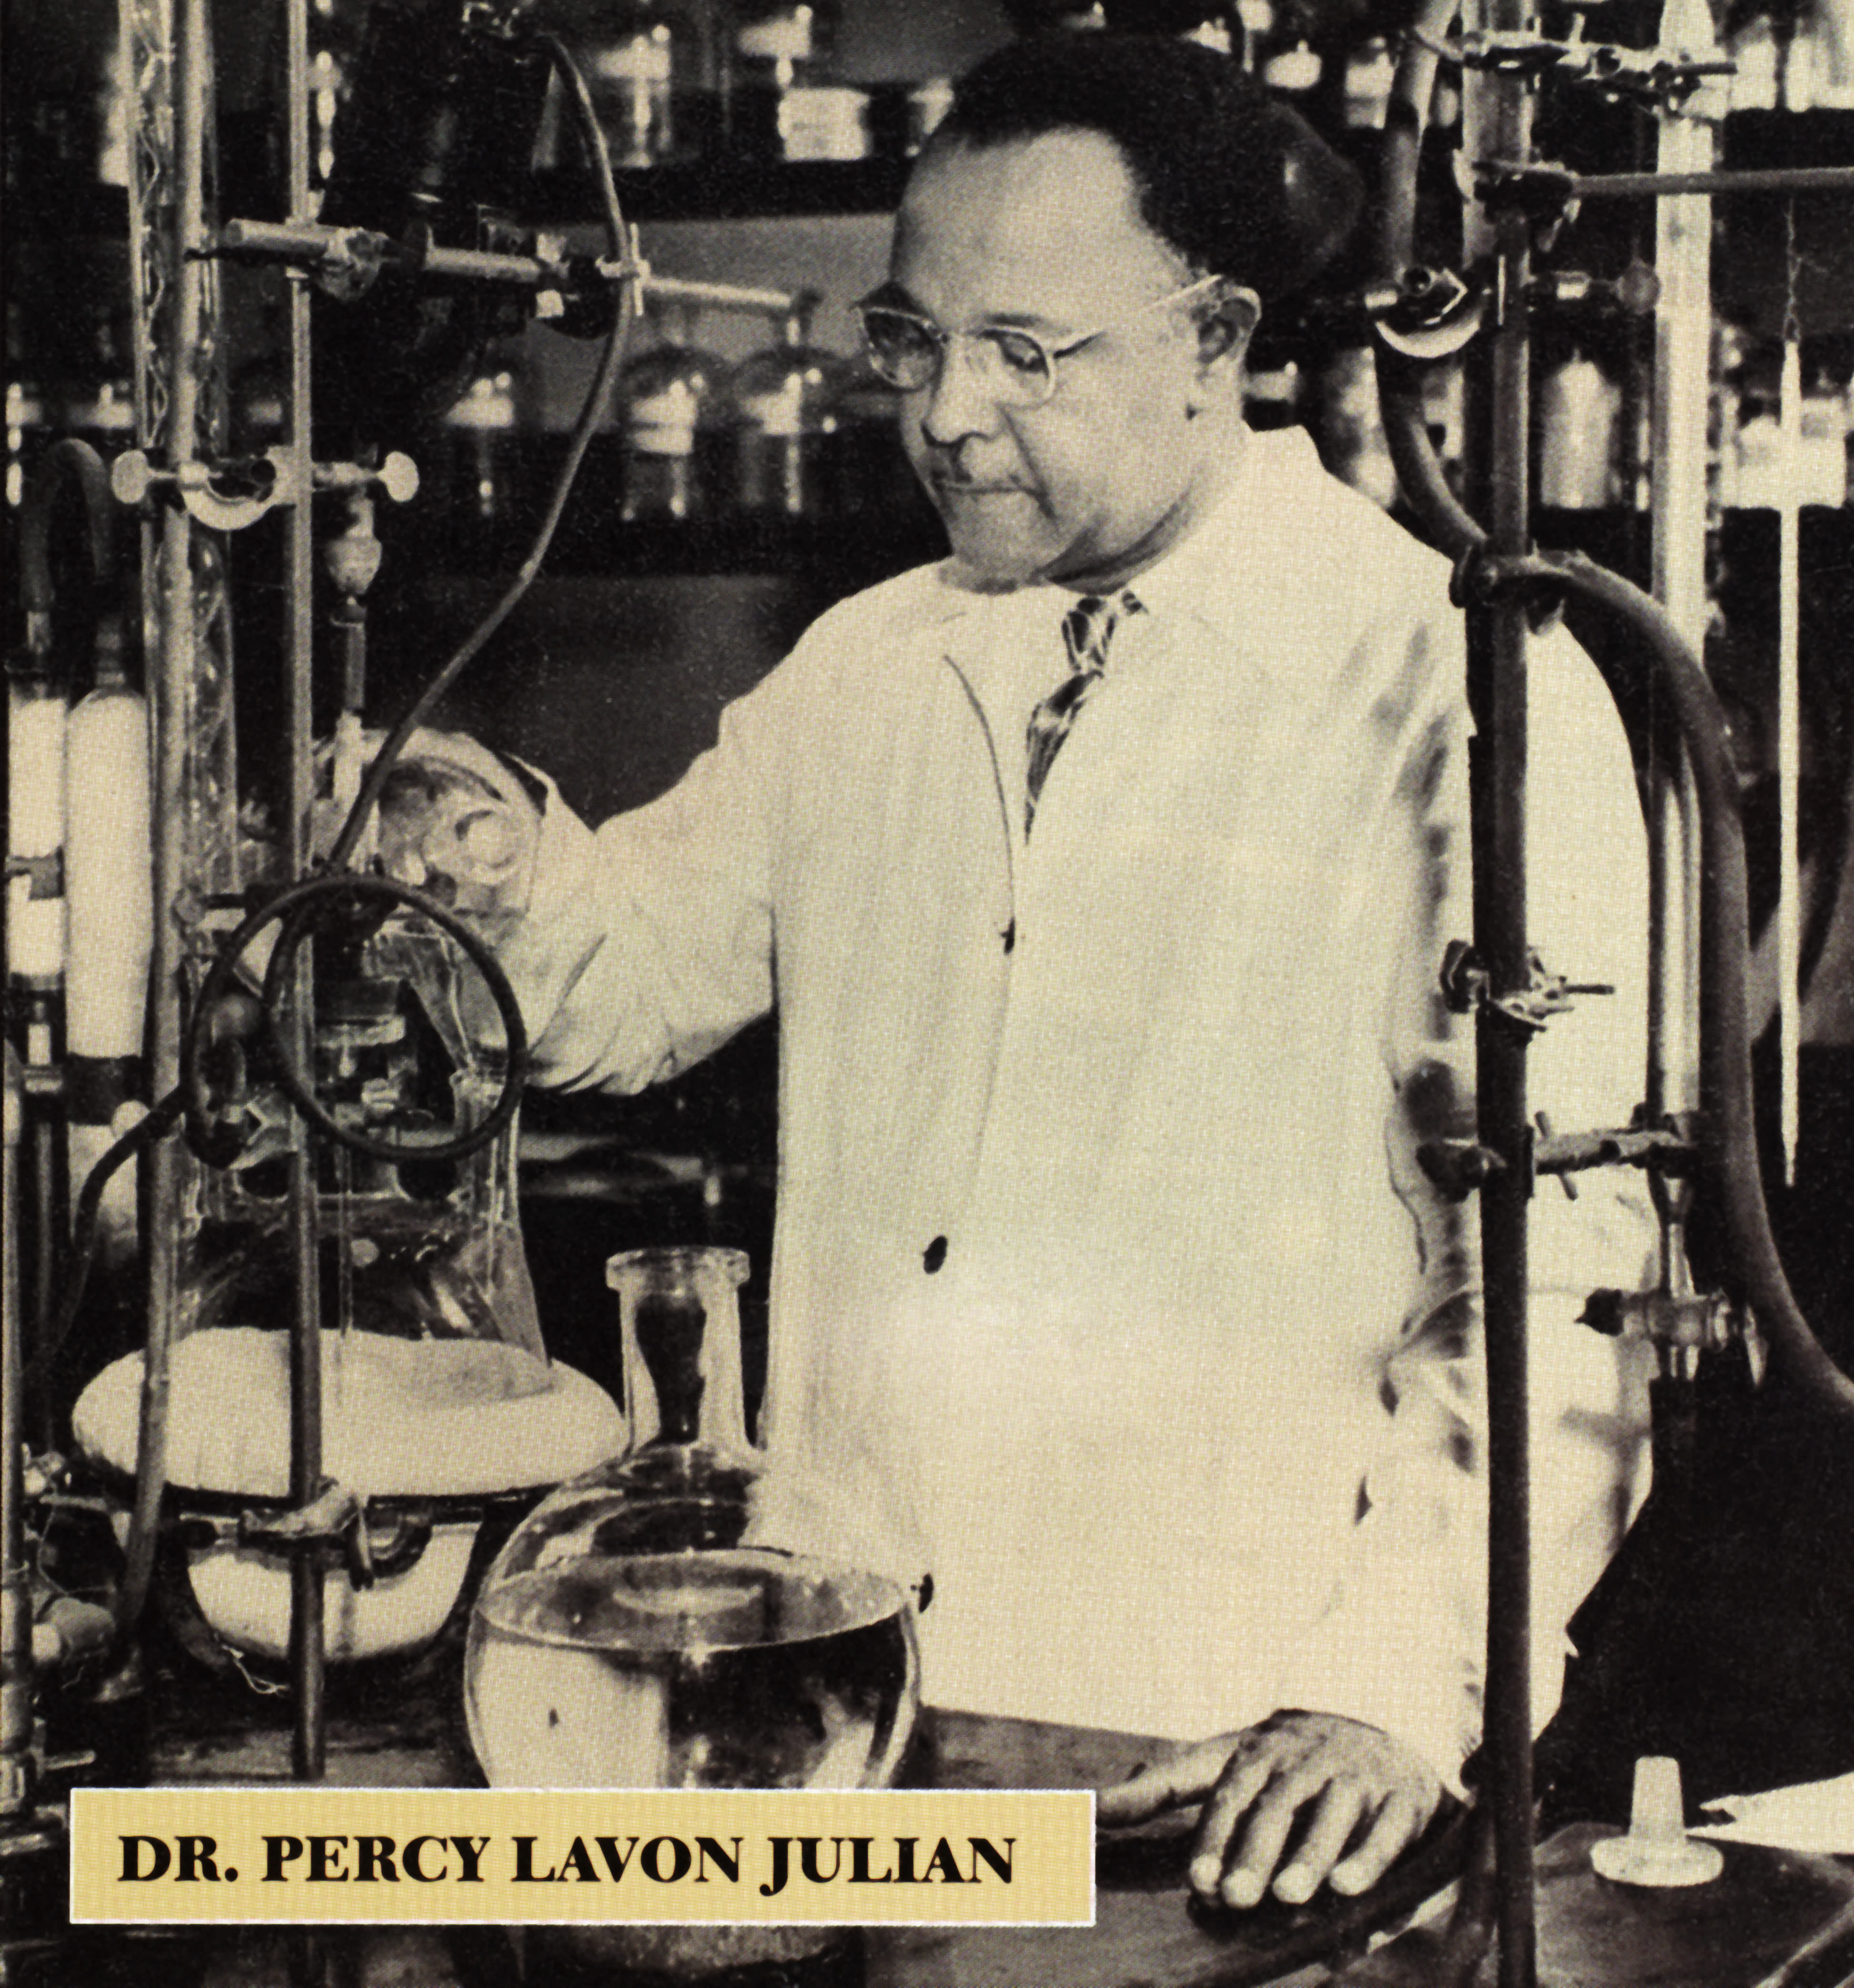 Dr. Percy Lavon Julian (SCIENCE SOURCE&mdash;Getty Images/Photo Researchers RM)